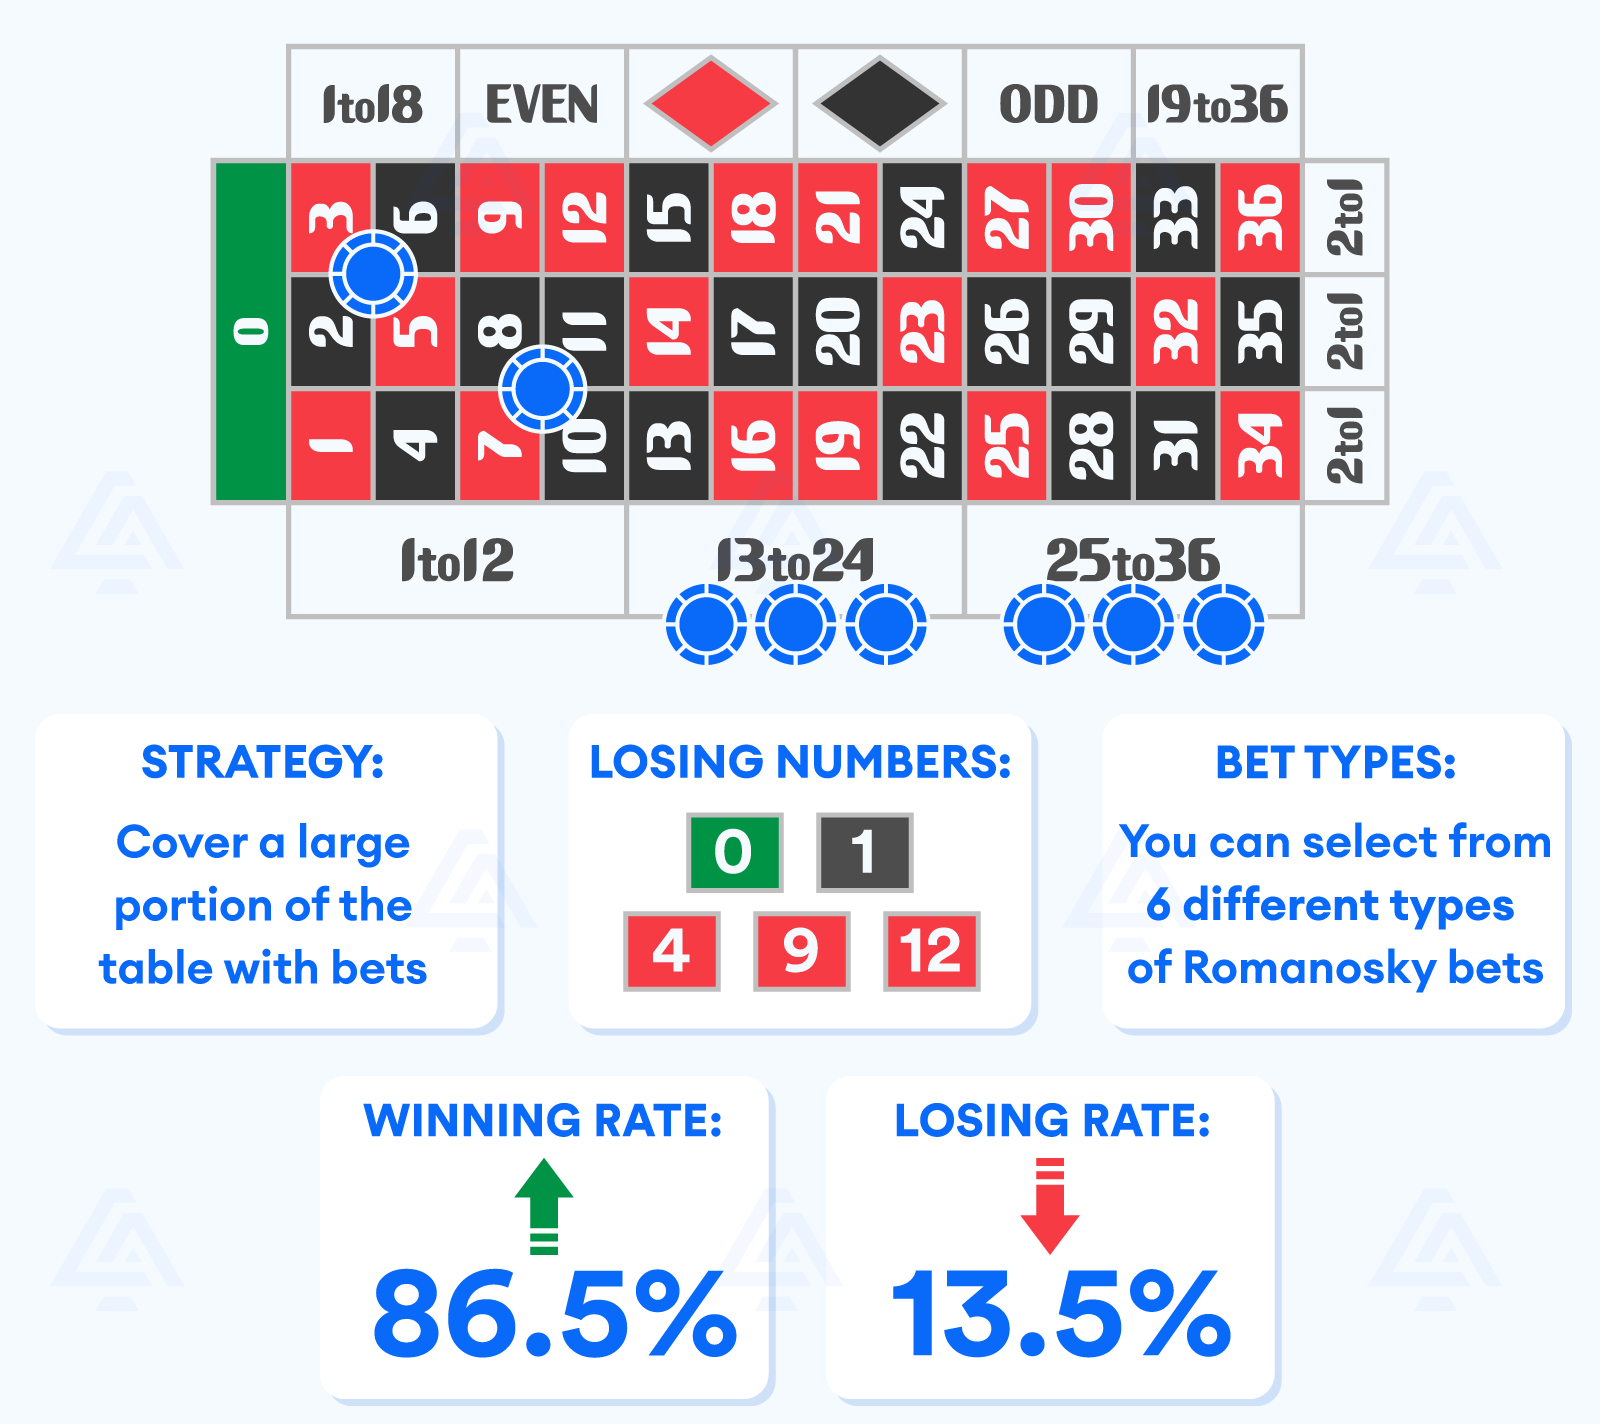 The basics of the Romanosky Roulette strategy